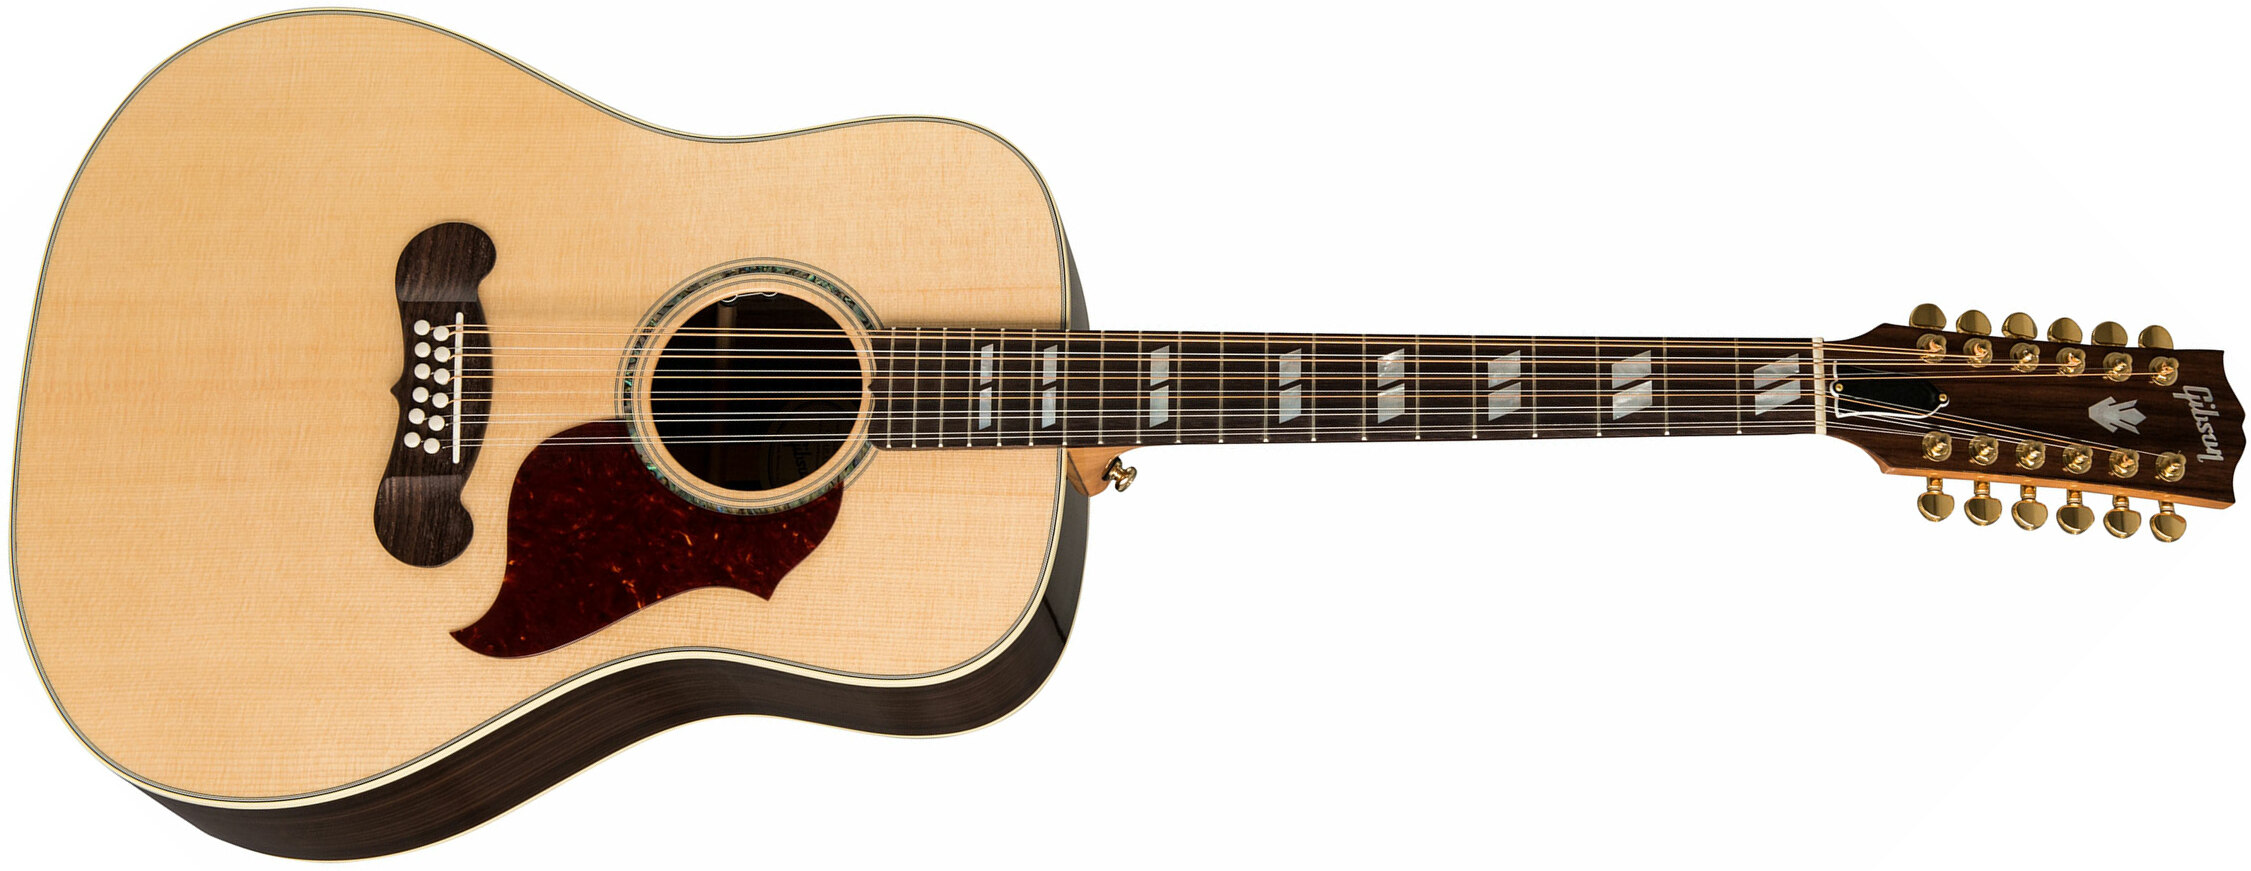 Gibson Songwriter 12-string 2019 Dreadnought 12-cordes Epicea Palissandre Rw - Antique Natural - Westerngitarre & electro - Main picture